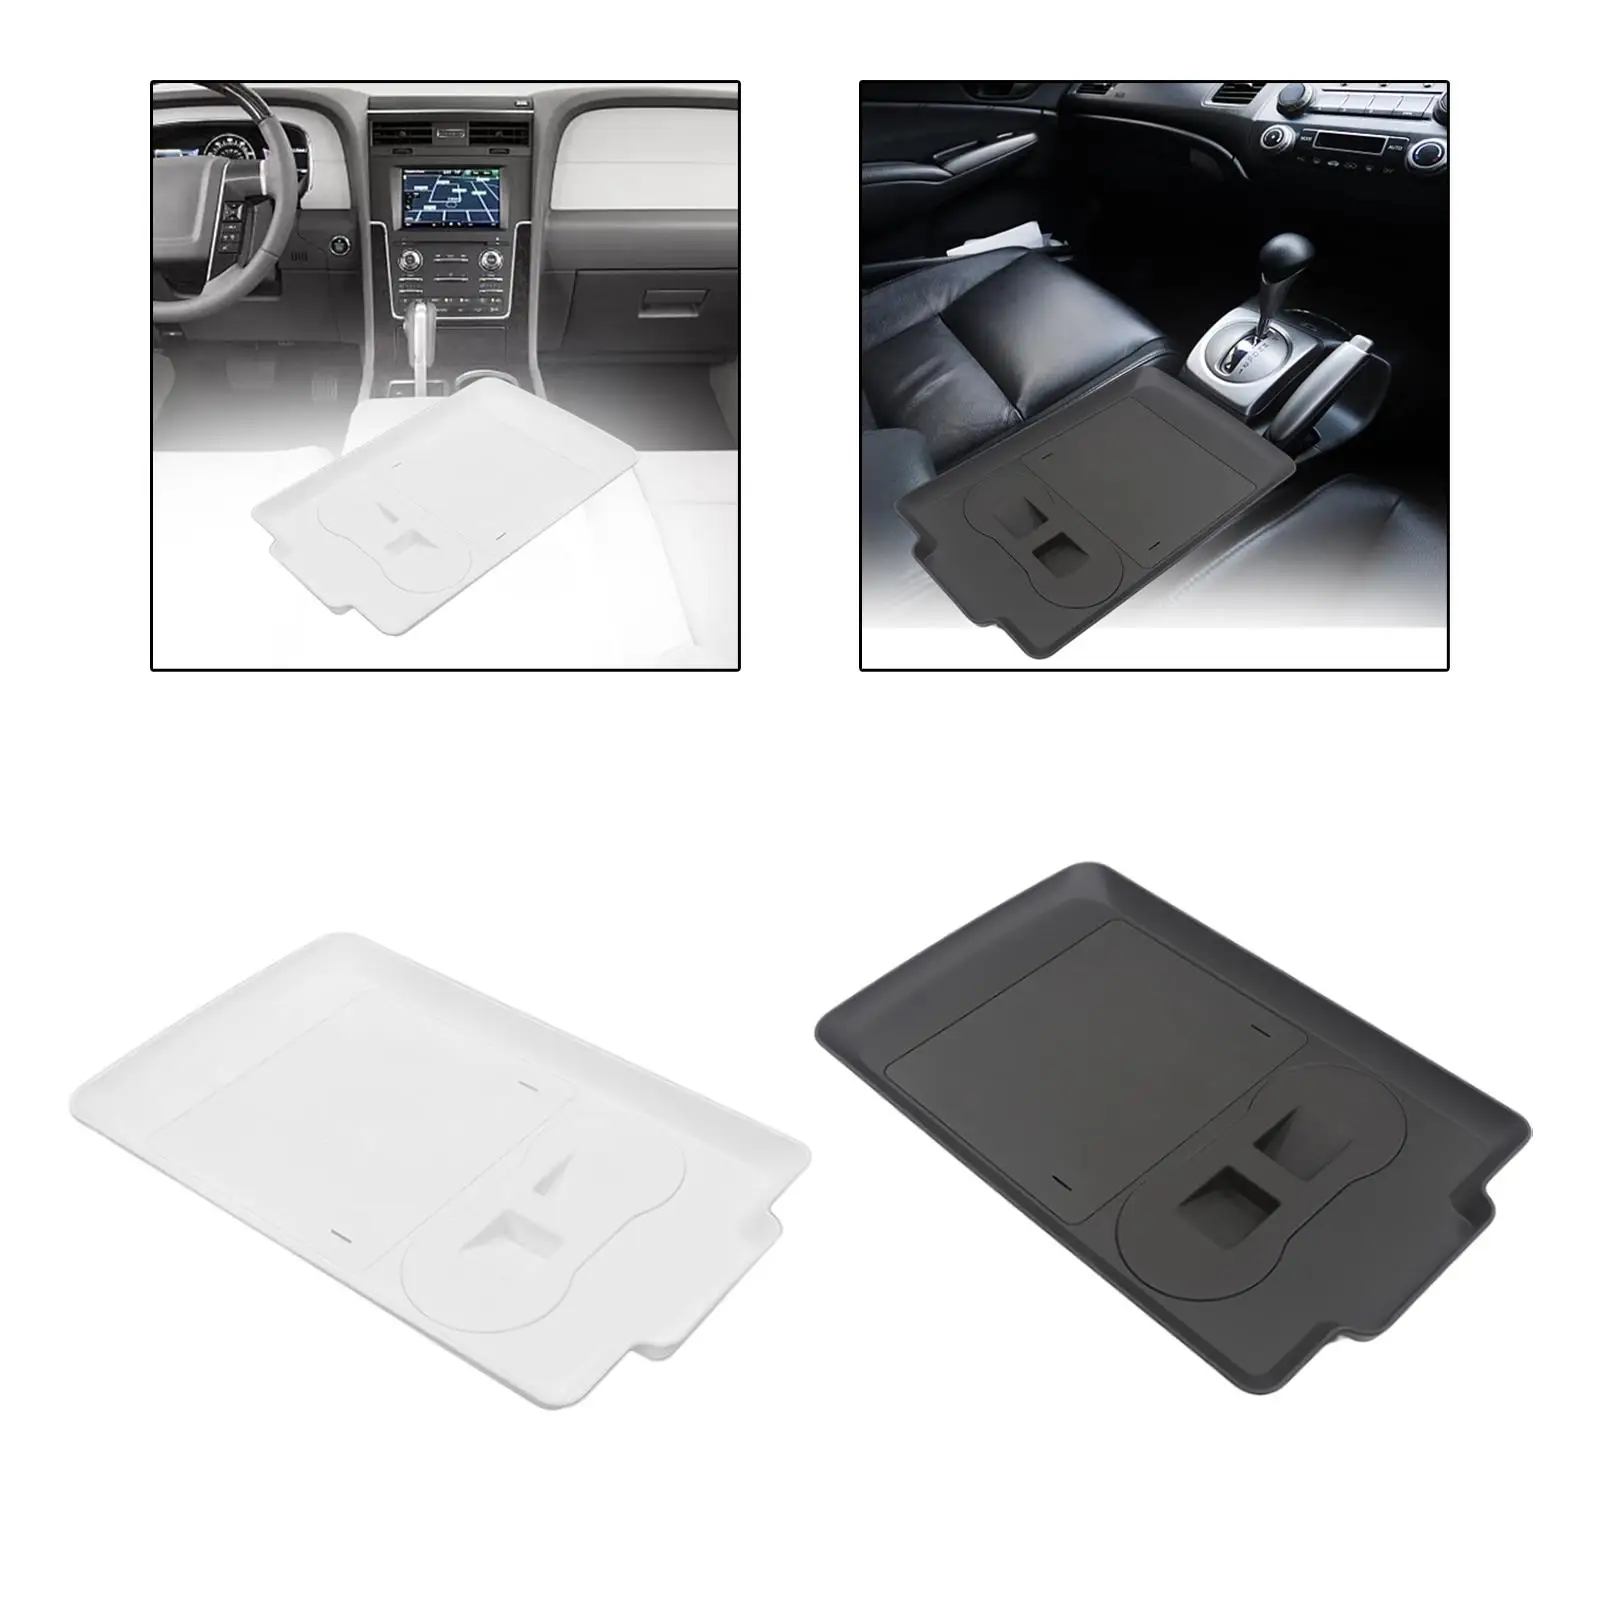 Food Eating Table Cup Holder Eating Professional Center Console Tray for Tesla Model 3 Model y Lunch 2021 2022 Laptop